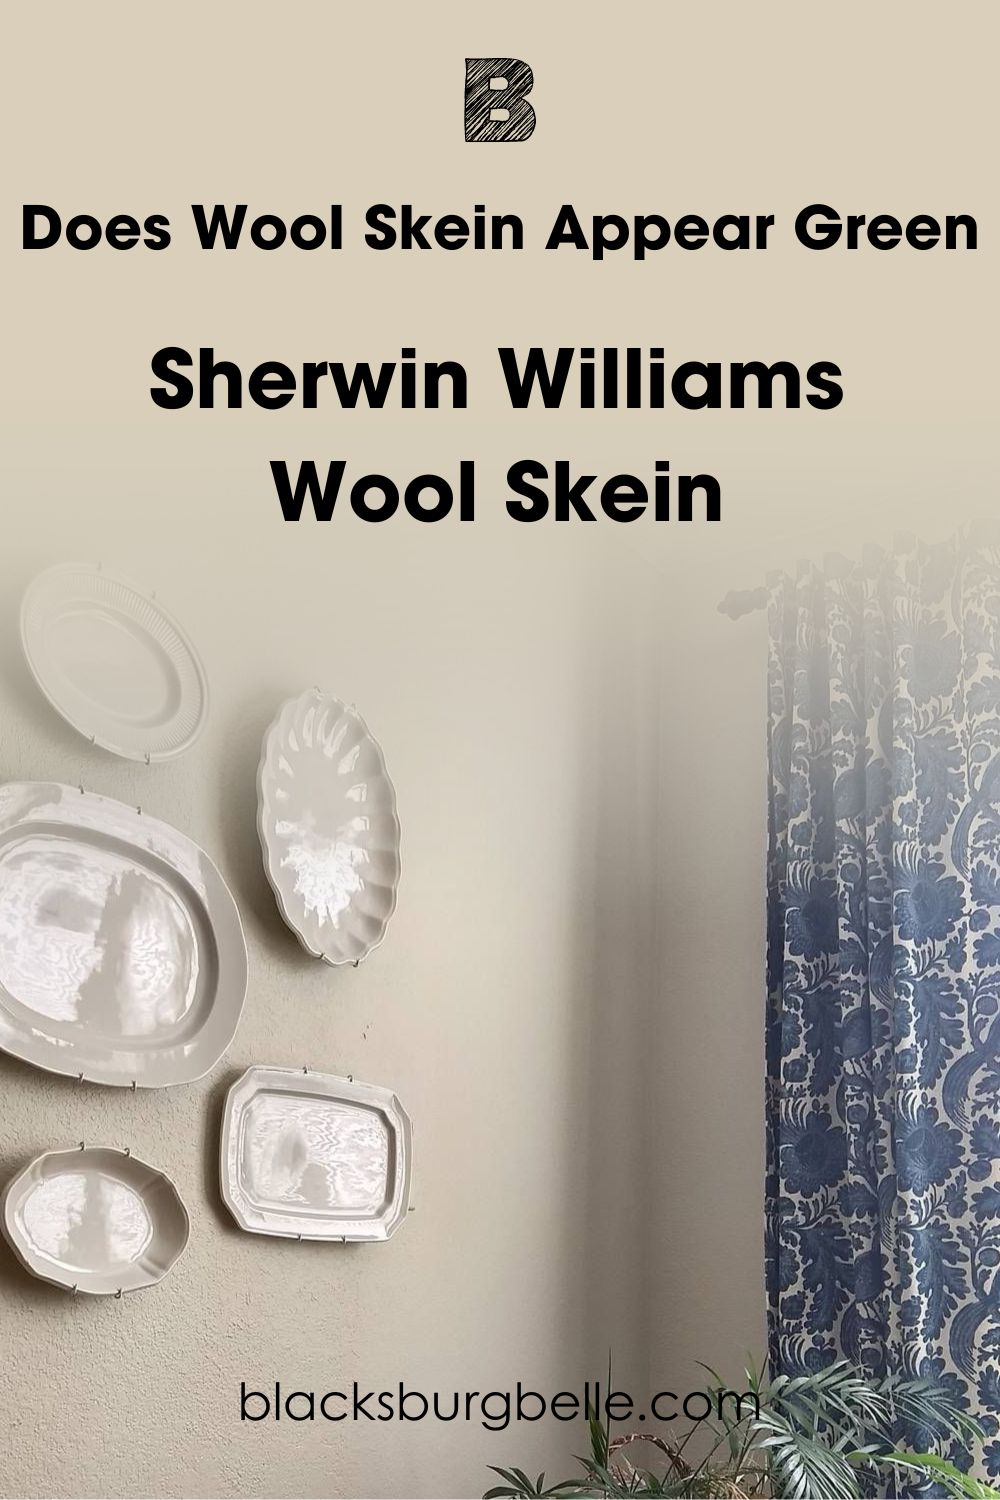 Does Wool Skein Appear Green